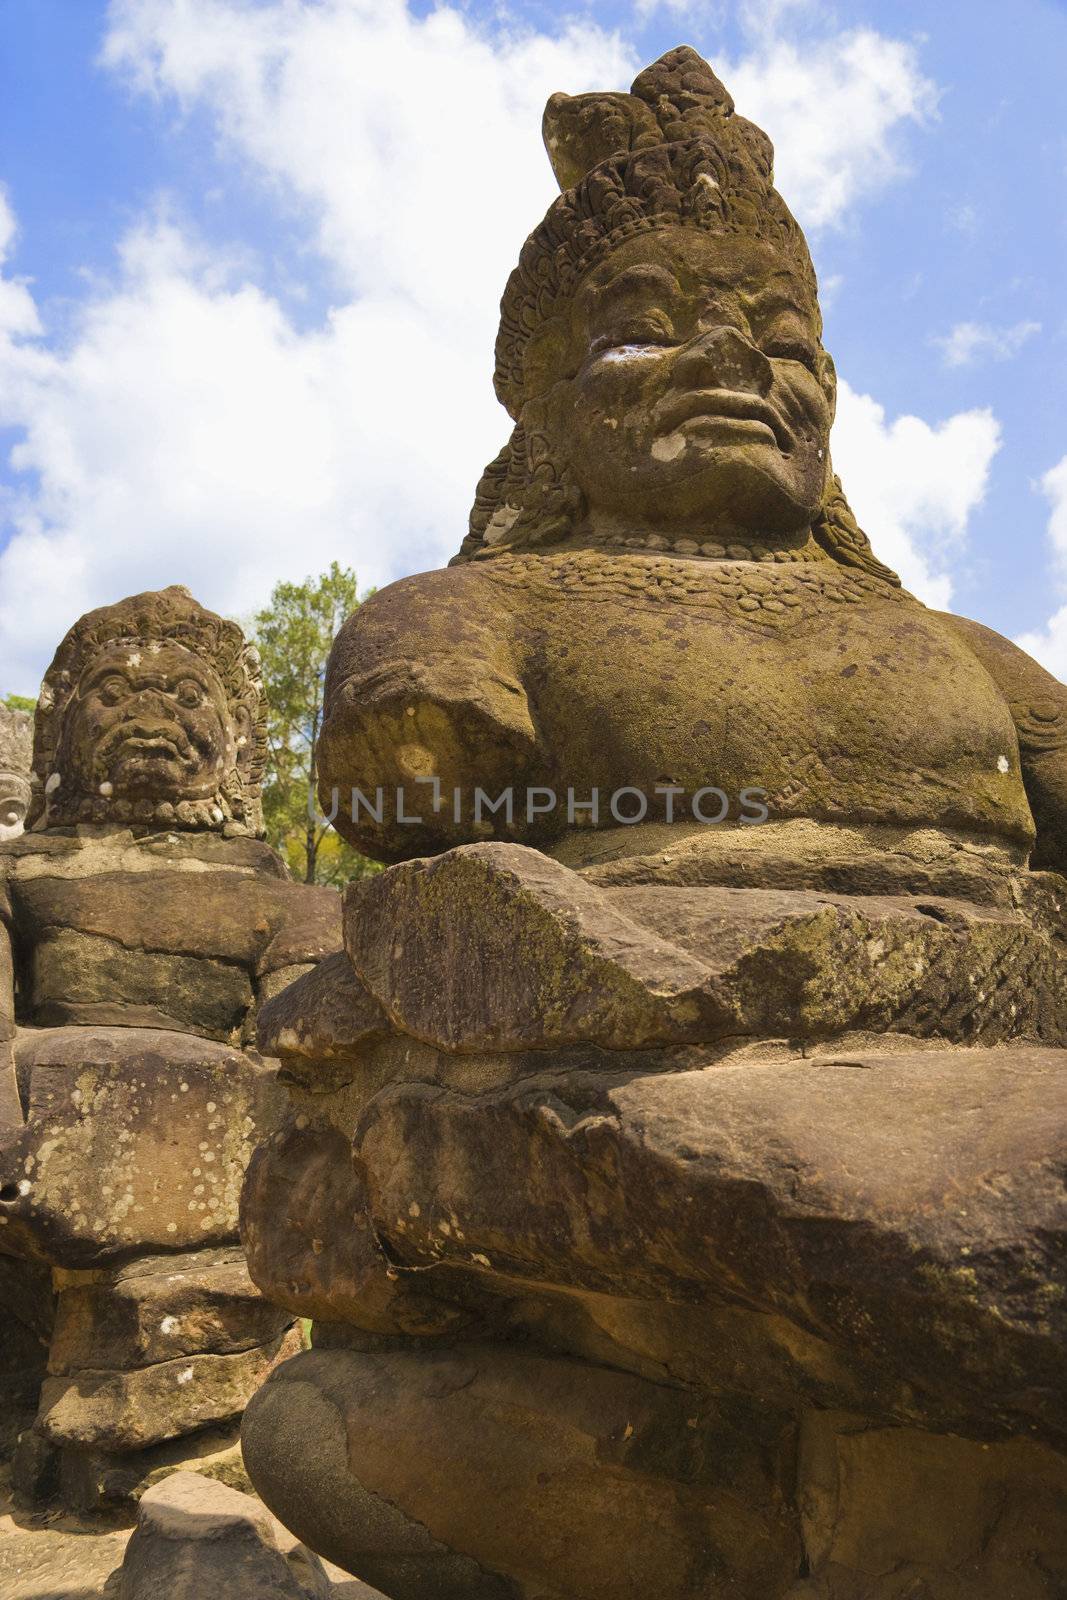 Image of ancient demon statues at the South Gate of UNESCO's World Heritage Site of Angkor Thom, Siem Reap, Cambodia. 